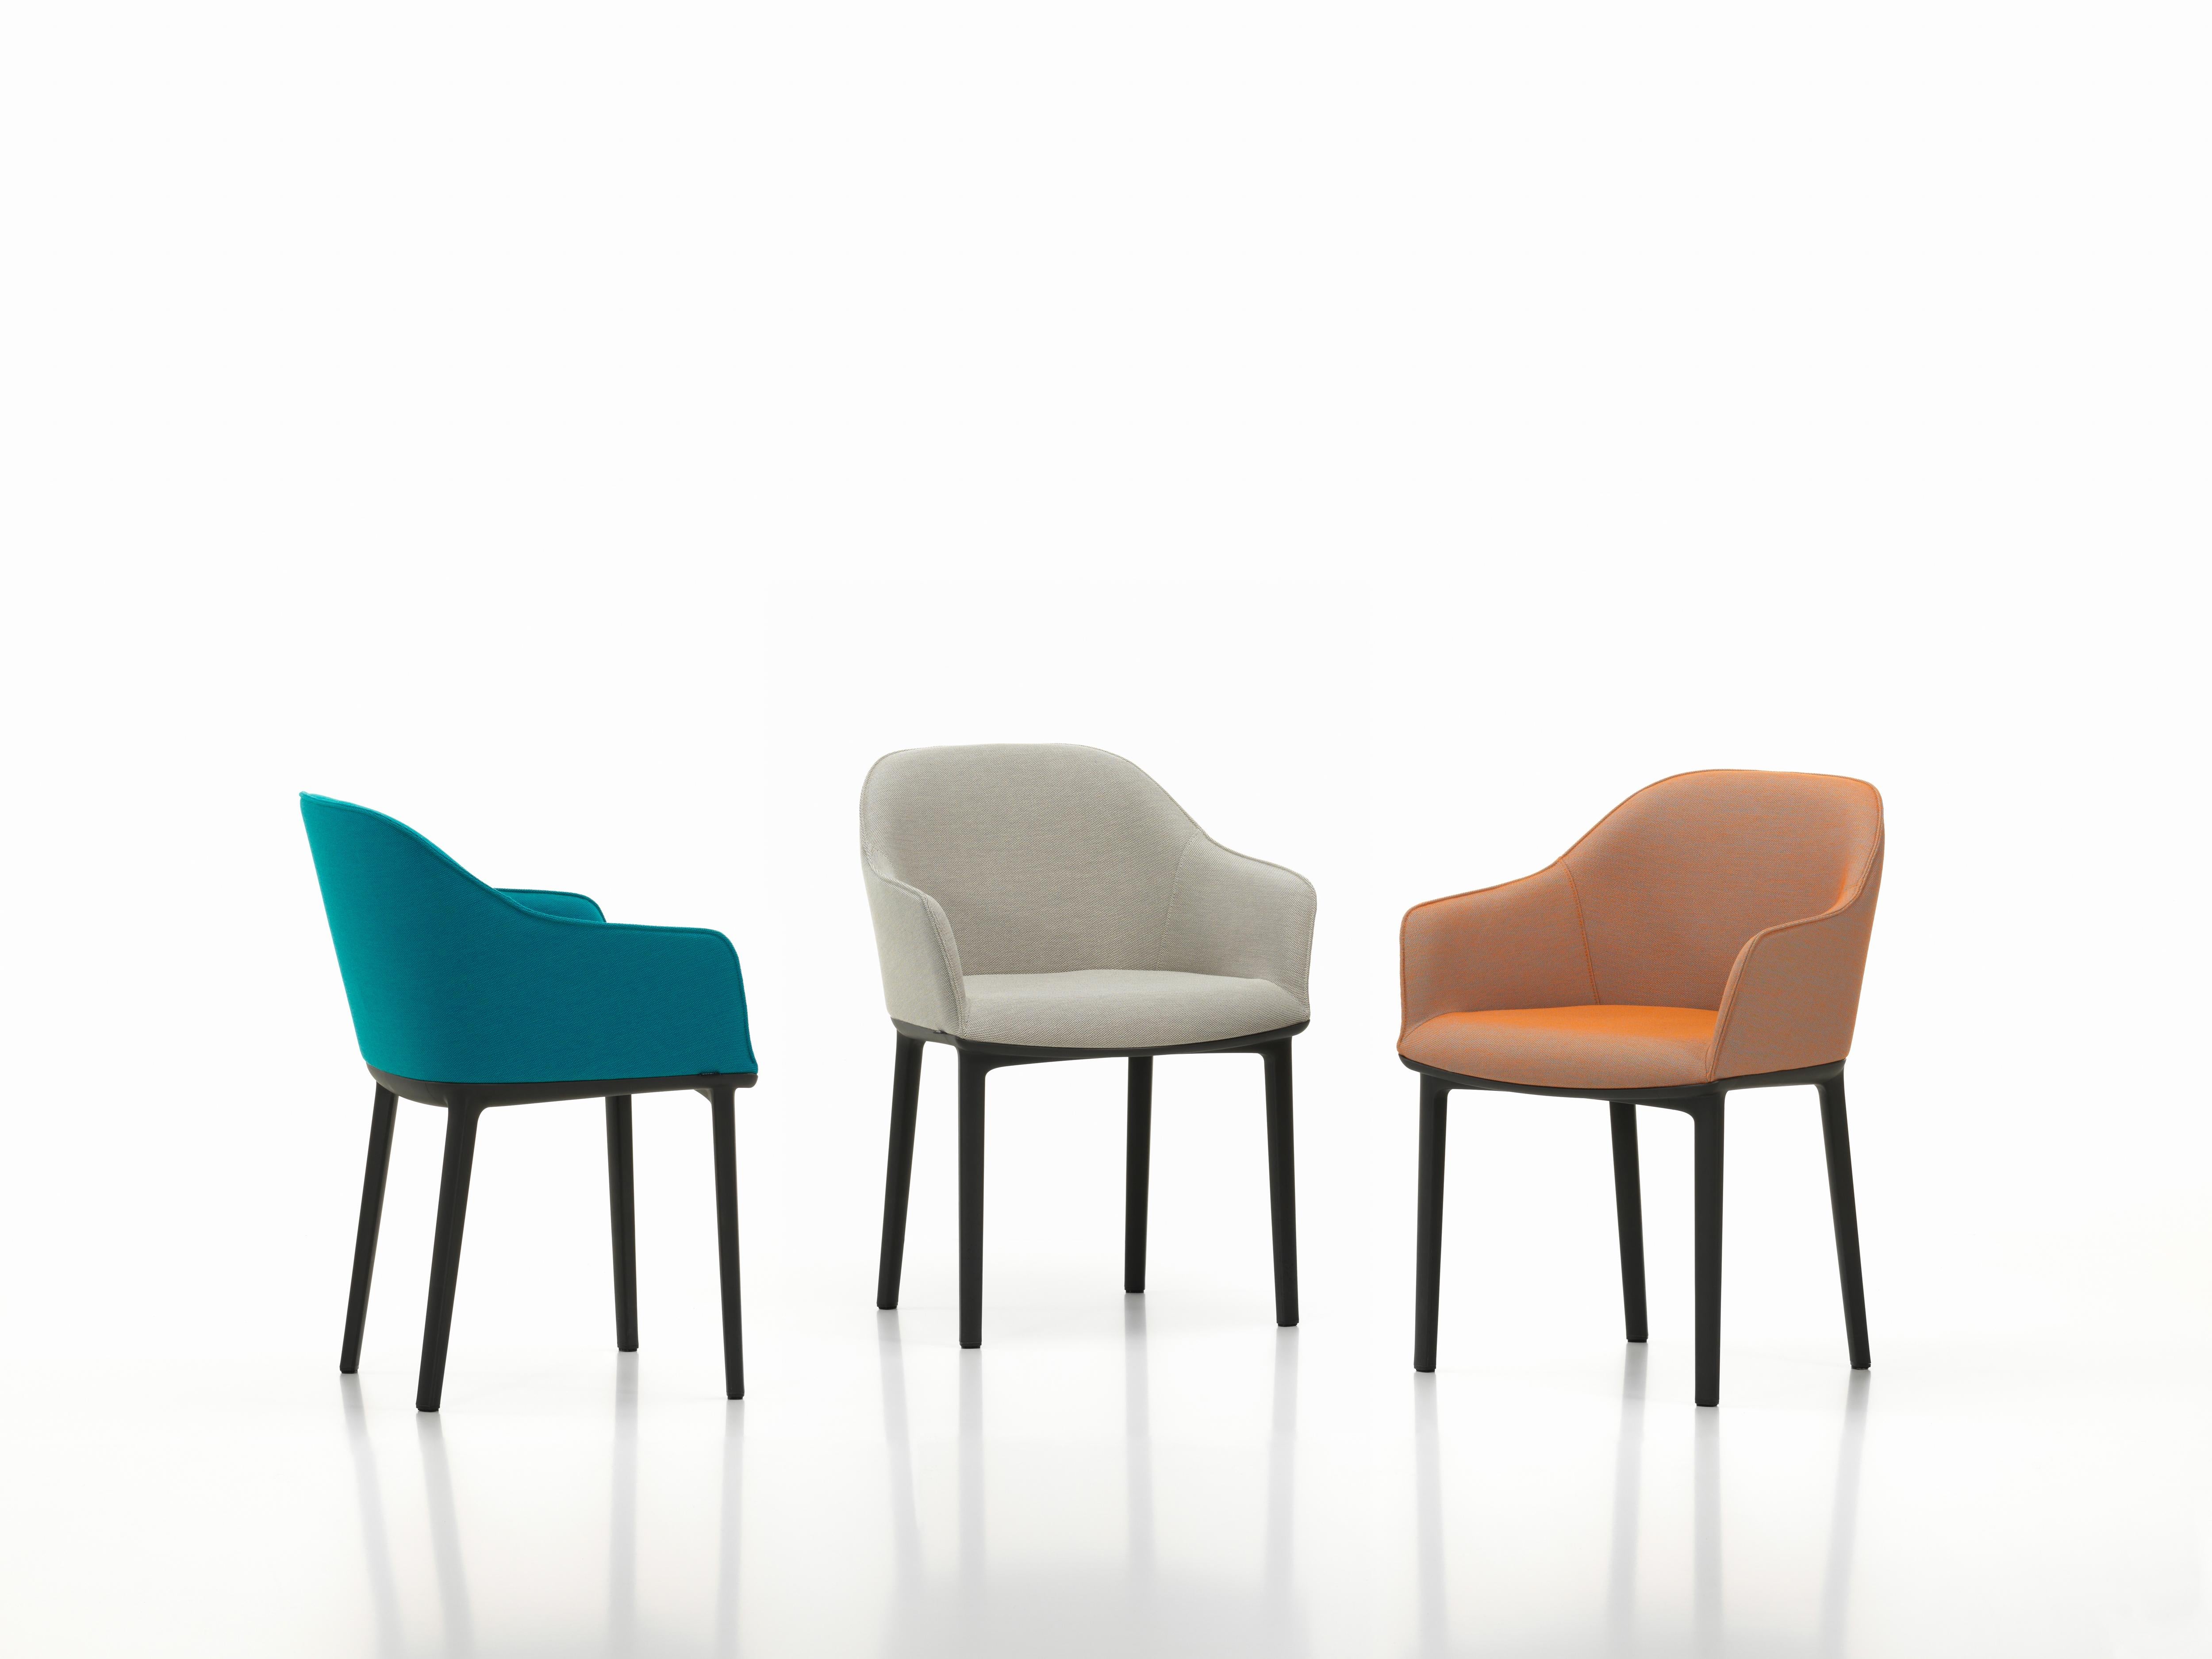 Modern Vitra Soft Shell Chair in Turquoise & Aqua Moss by Ronan & Erwan Bouroullec For Sale